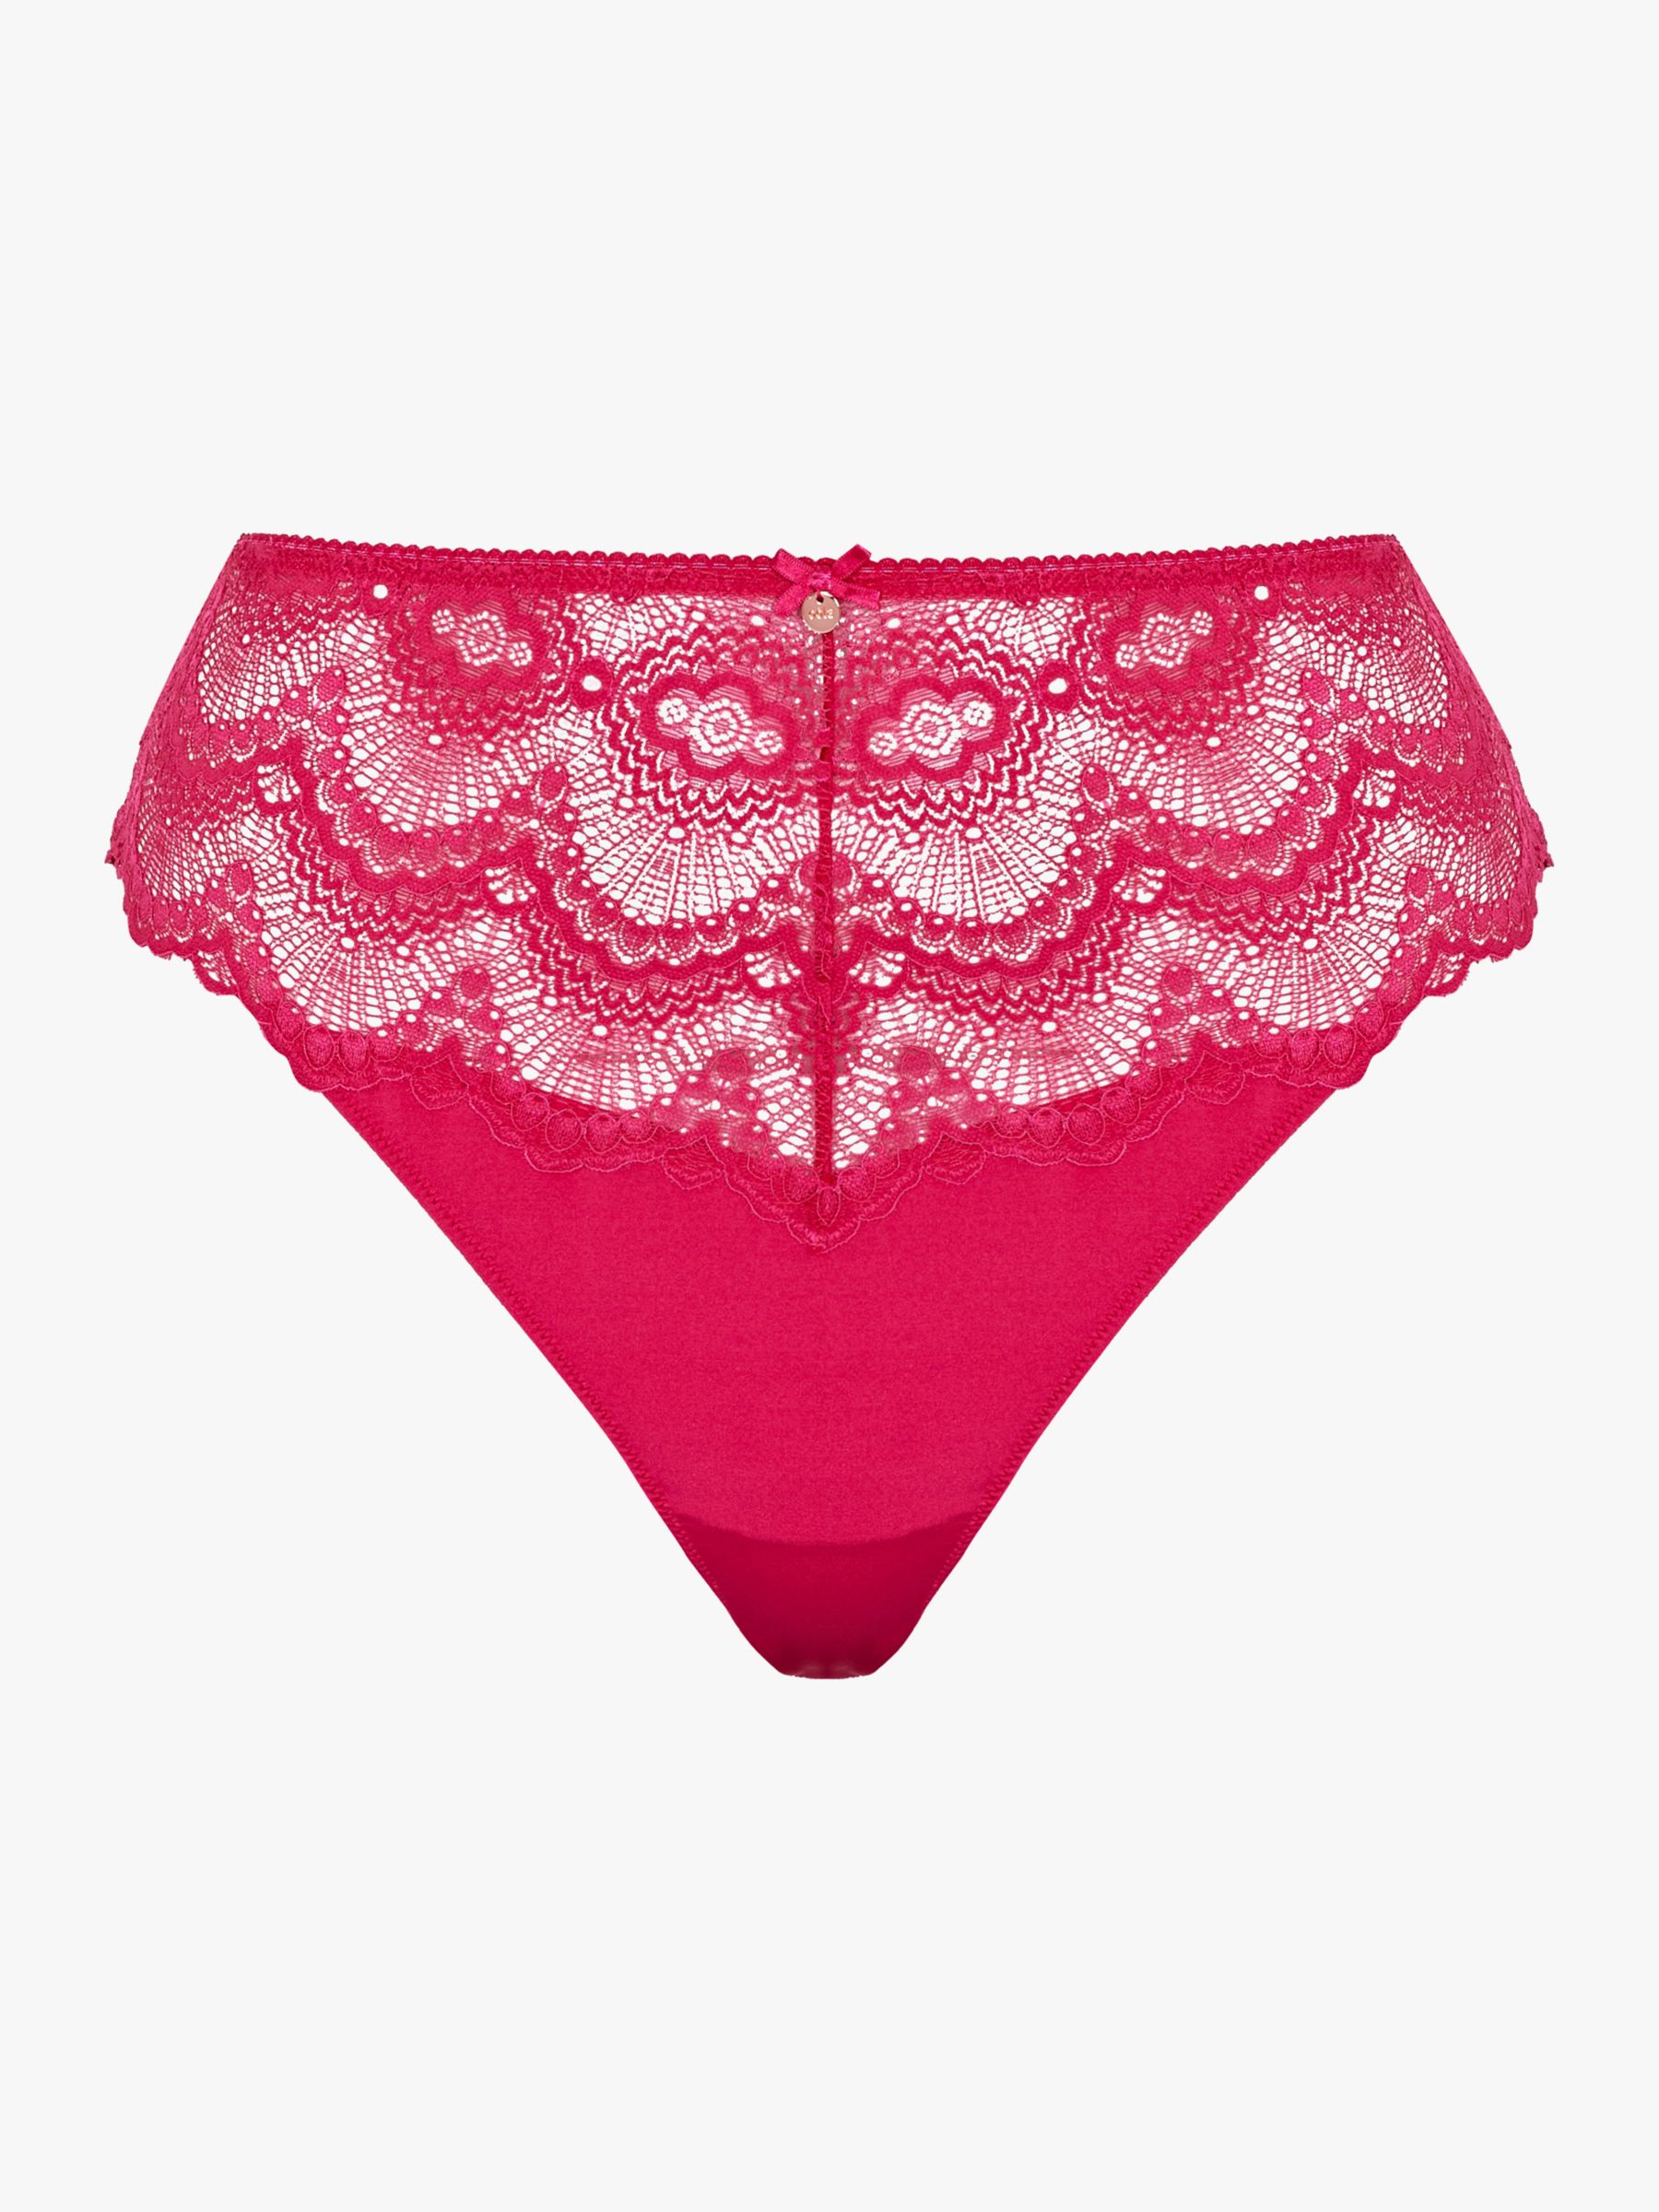 Oola Lingerie Fan Lace Thong, Bright Pink at John Lewis & Partners